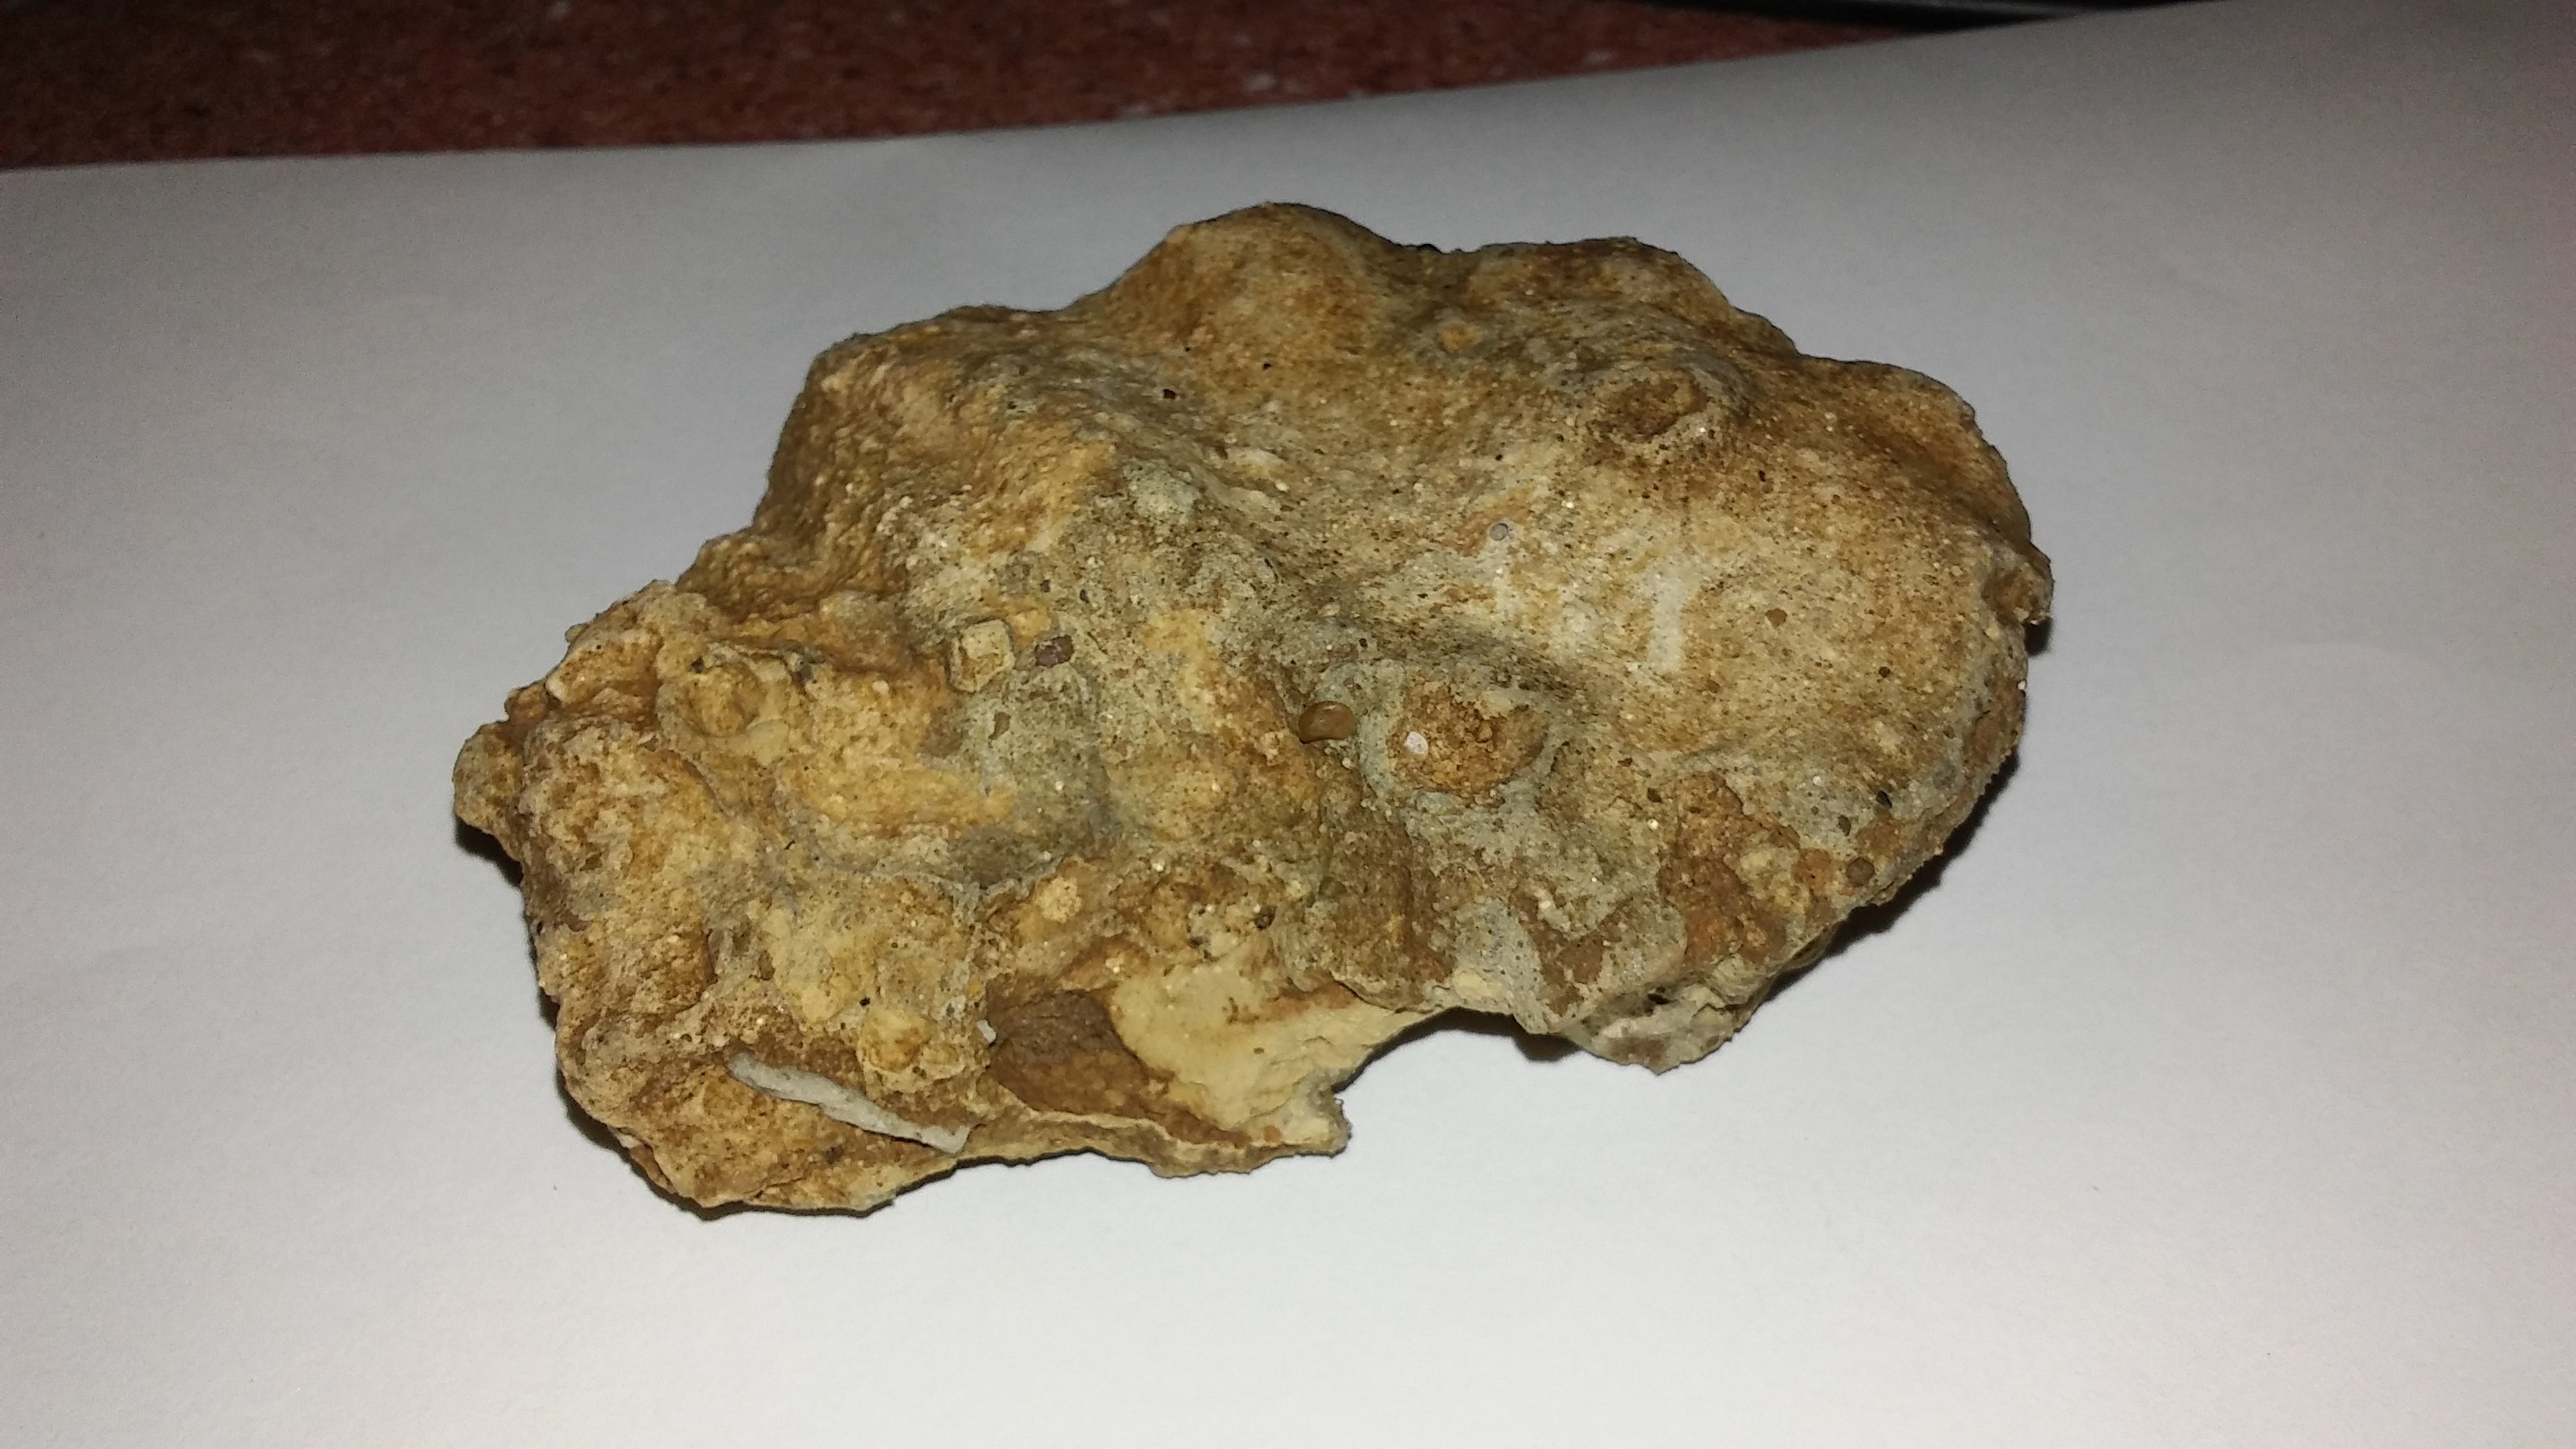 Petrified turtle? - Fossil ID - The Fossil Forum